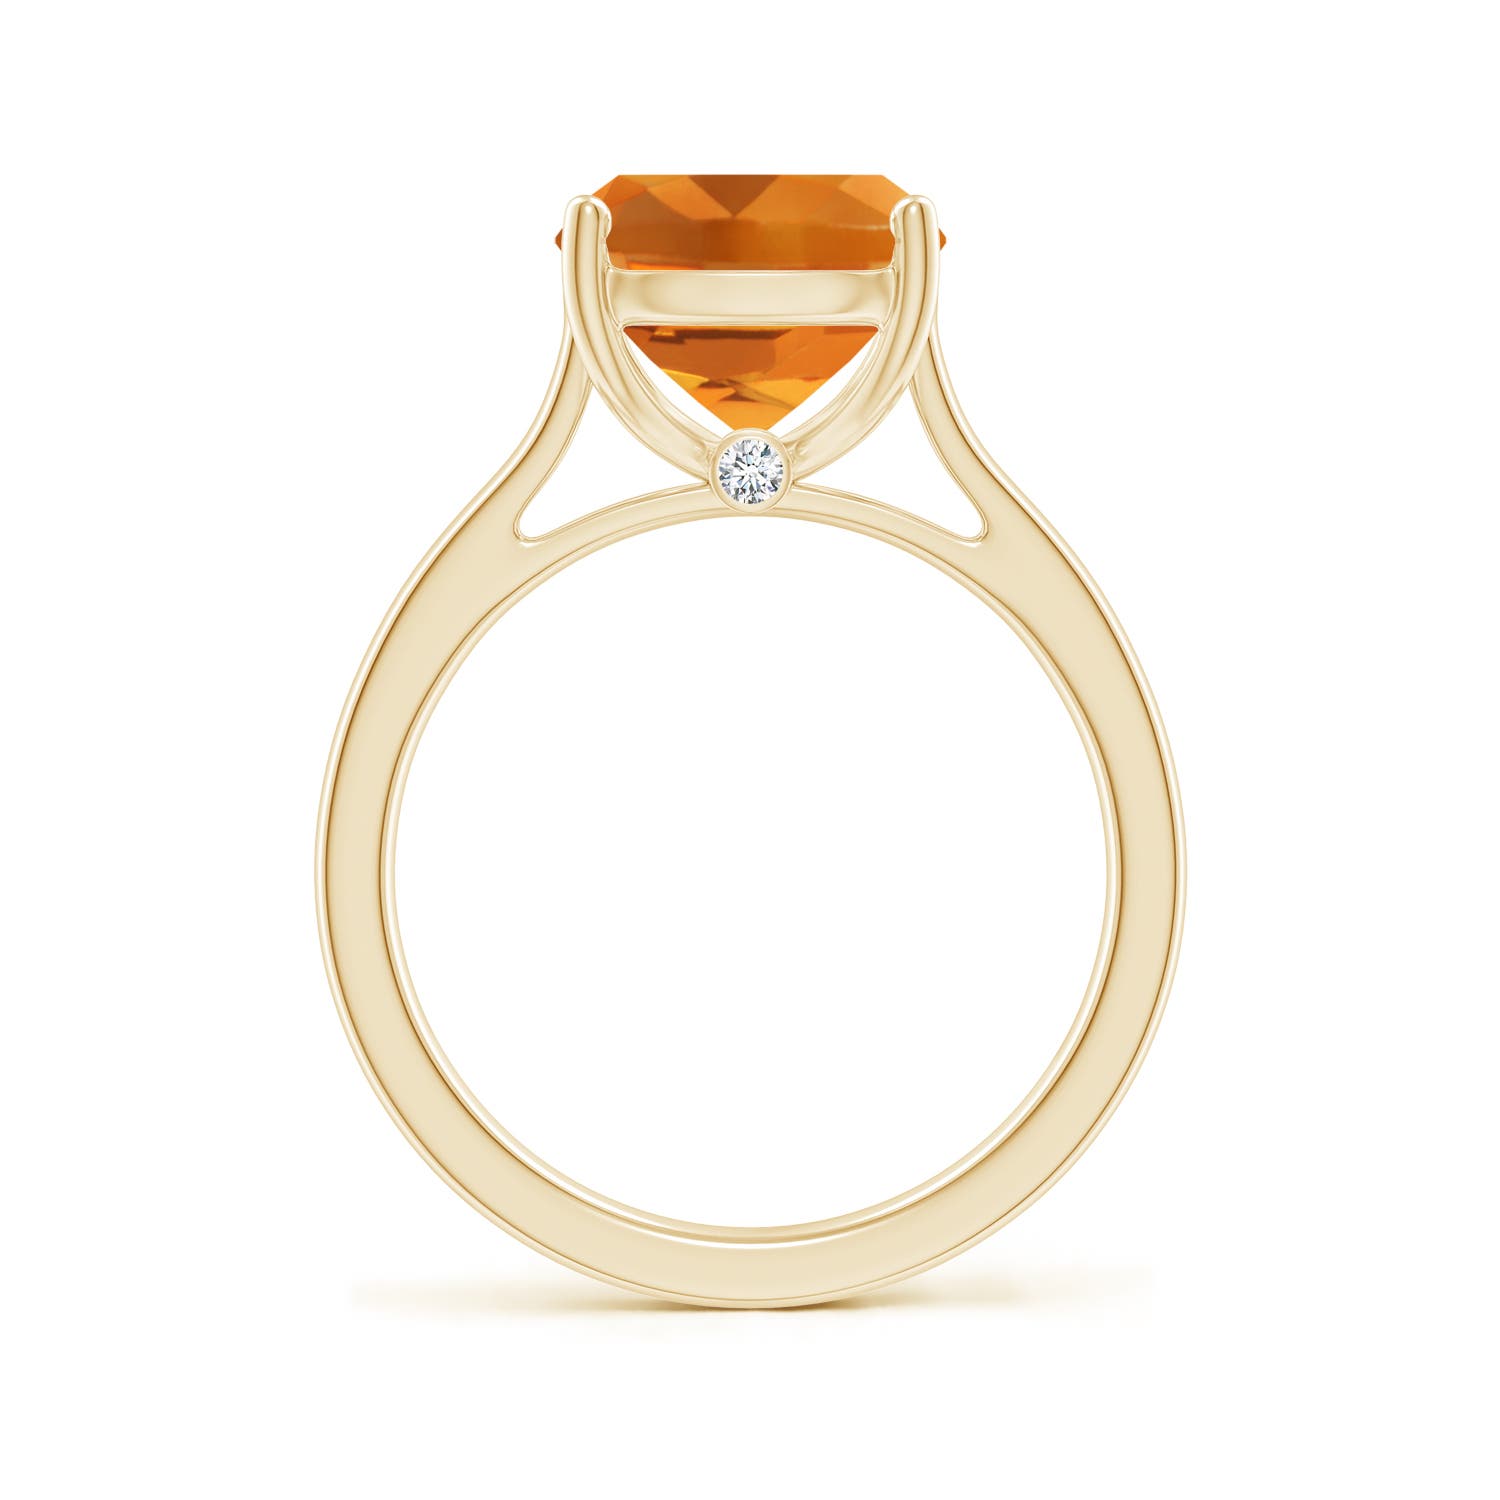 AAA - Citrine / 3.73 CT / 14 KT Yellow Gold